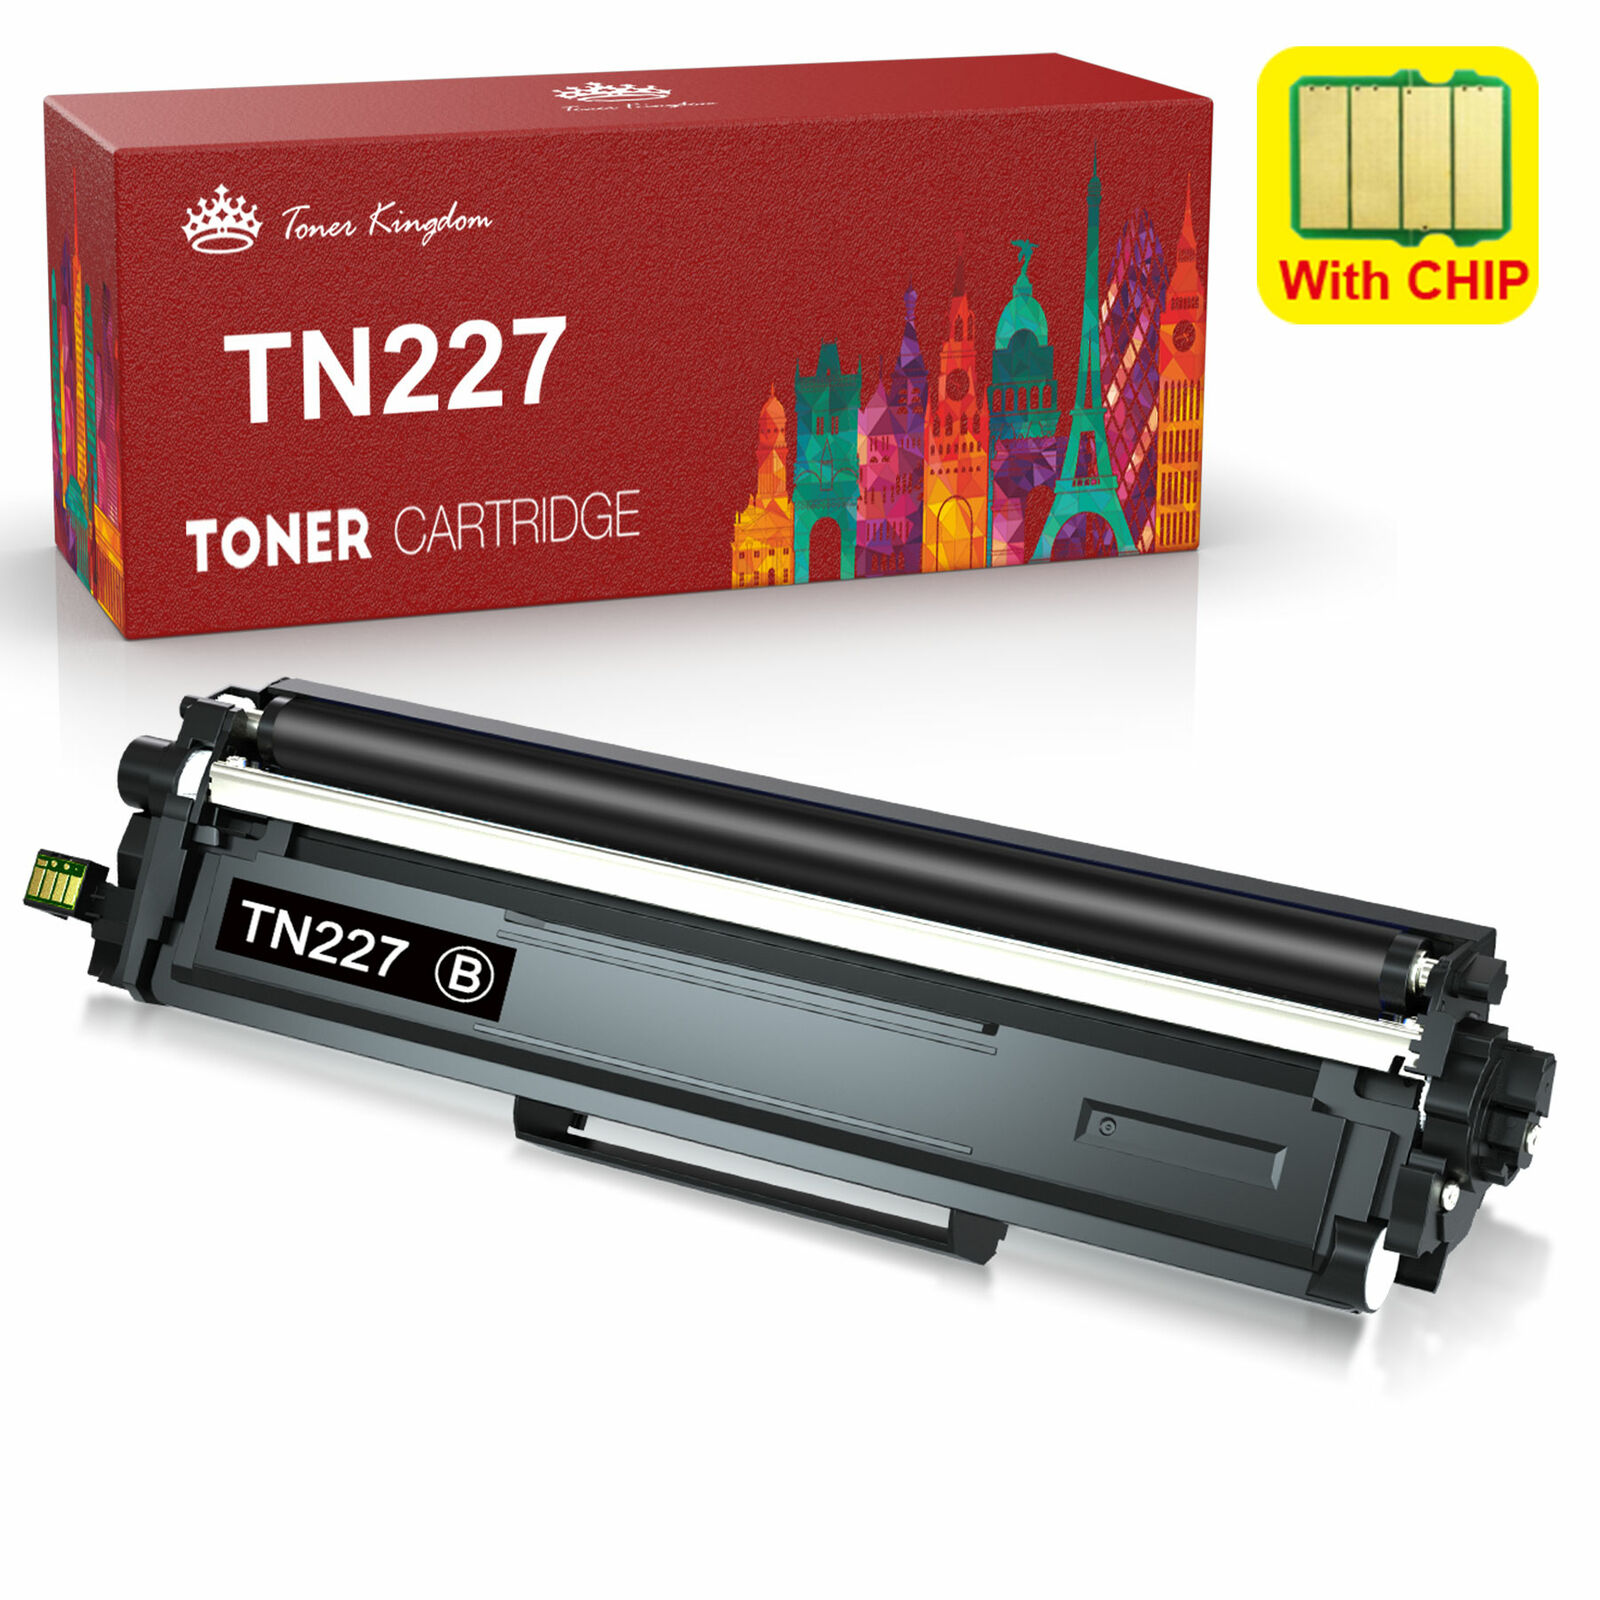 DR223 Drum TN227 TN223 Toner replacement for Brother HL-L3270CDW L3290CDW Lot